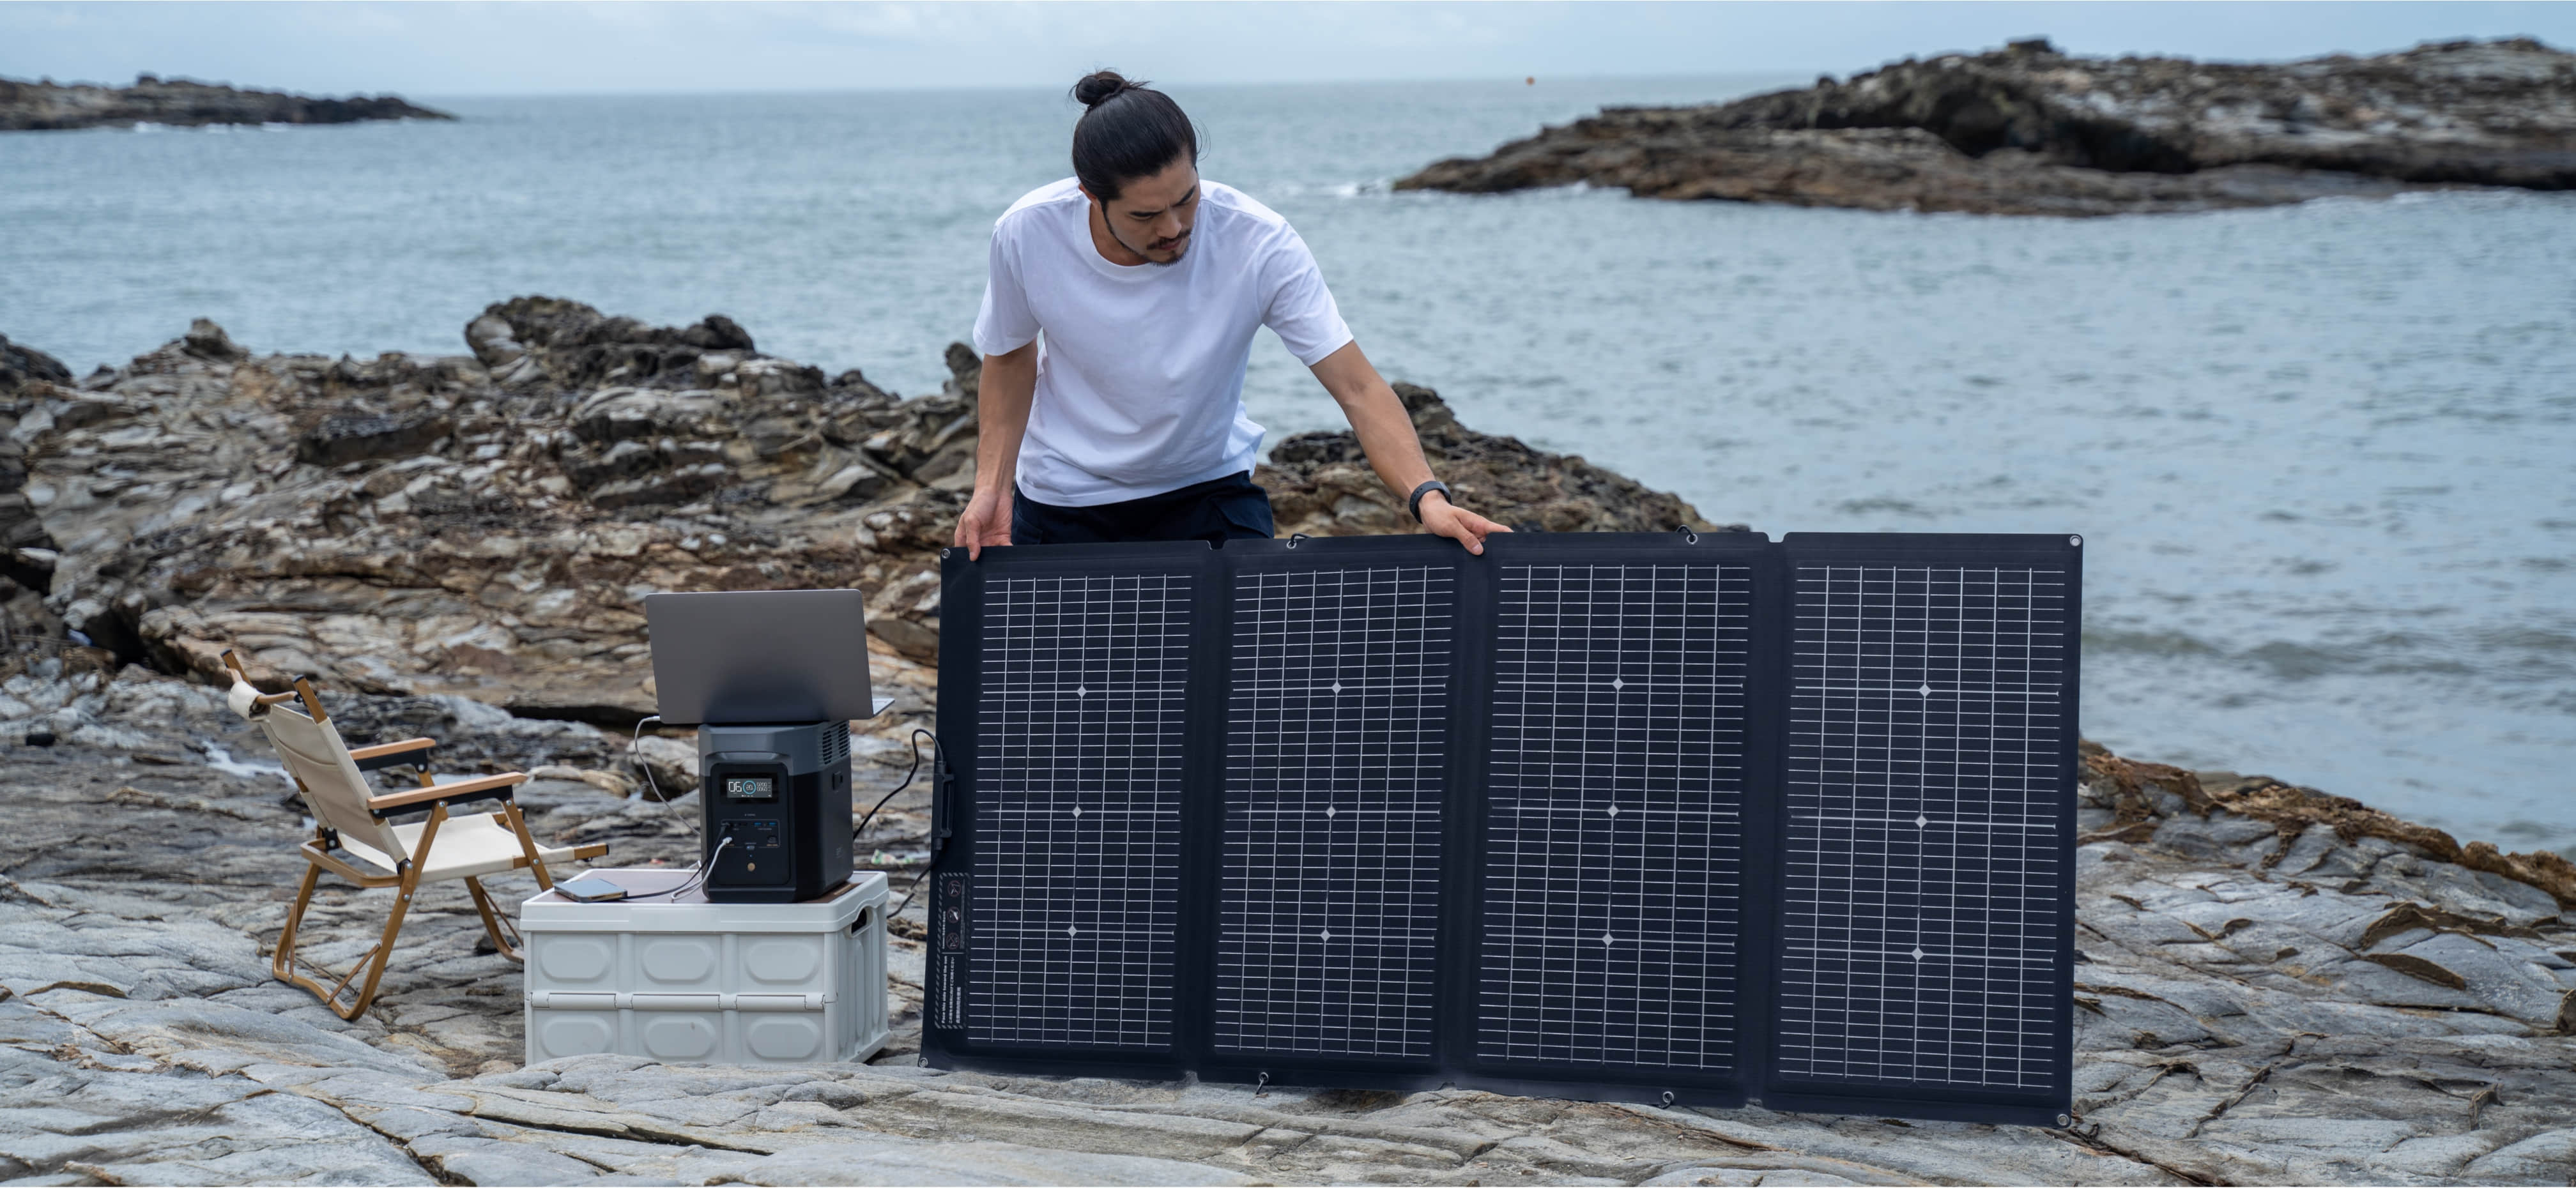 Pick from a range of solar panels to get the speed you need (110W, 160W, 220W, 400W). With that, you’ve got access to free energy anywhere.
* With 2 × 220W Portable Solar Panel